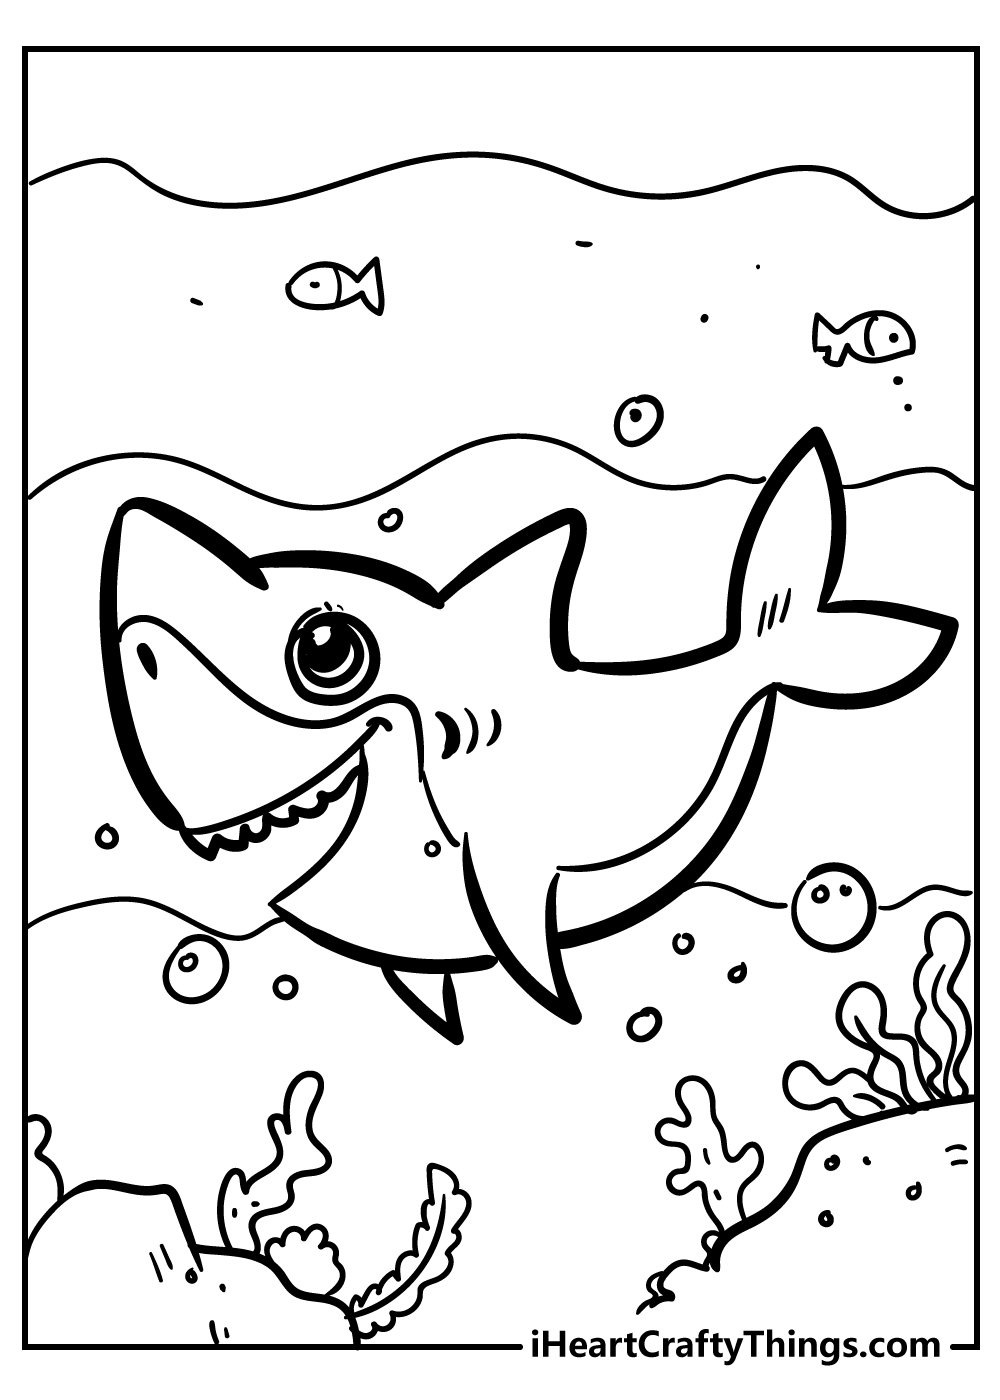 25 Shark Coloring Pages